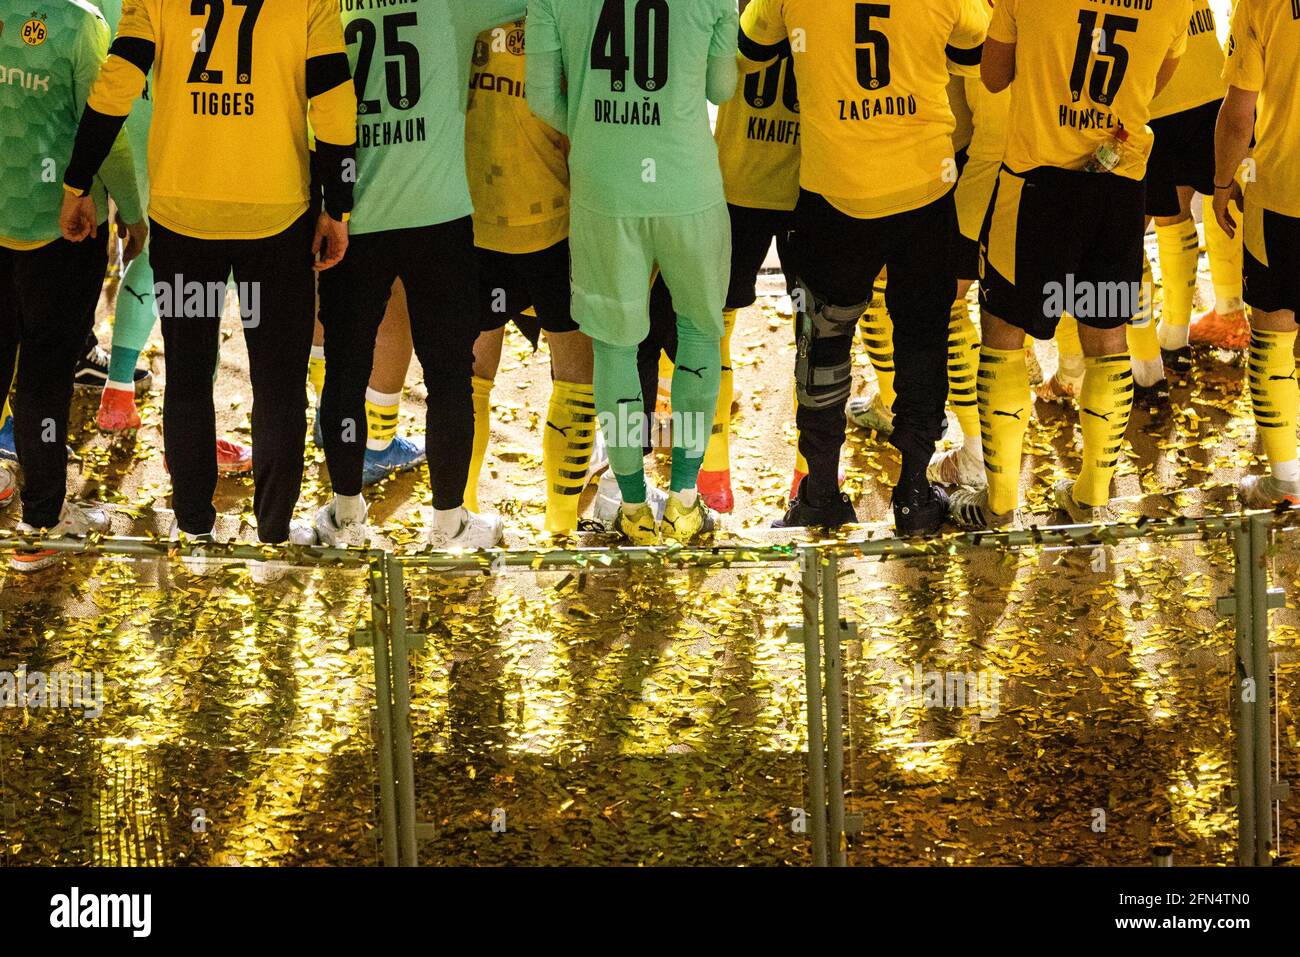 Berlin, Olympiastadion 13.05.21: Marco Reus (BVB) and teammates celebrate the winning of the trophy during the final cup match between RB Leipzig vs. Borussia Dortmund. Foto: pressefoto Credit: Mika Volkmann/Alamy Live News Stock Photo